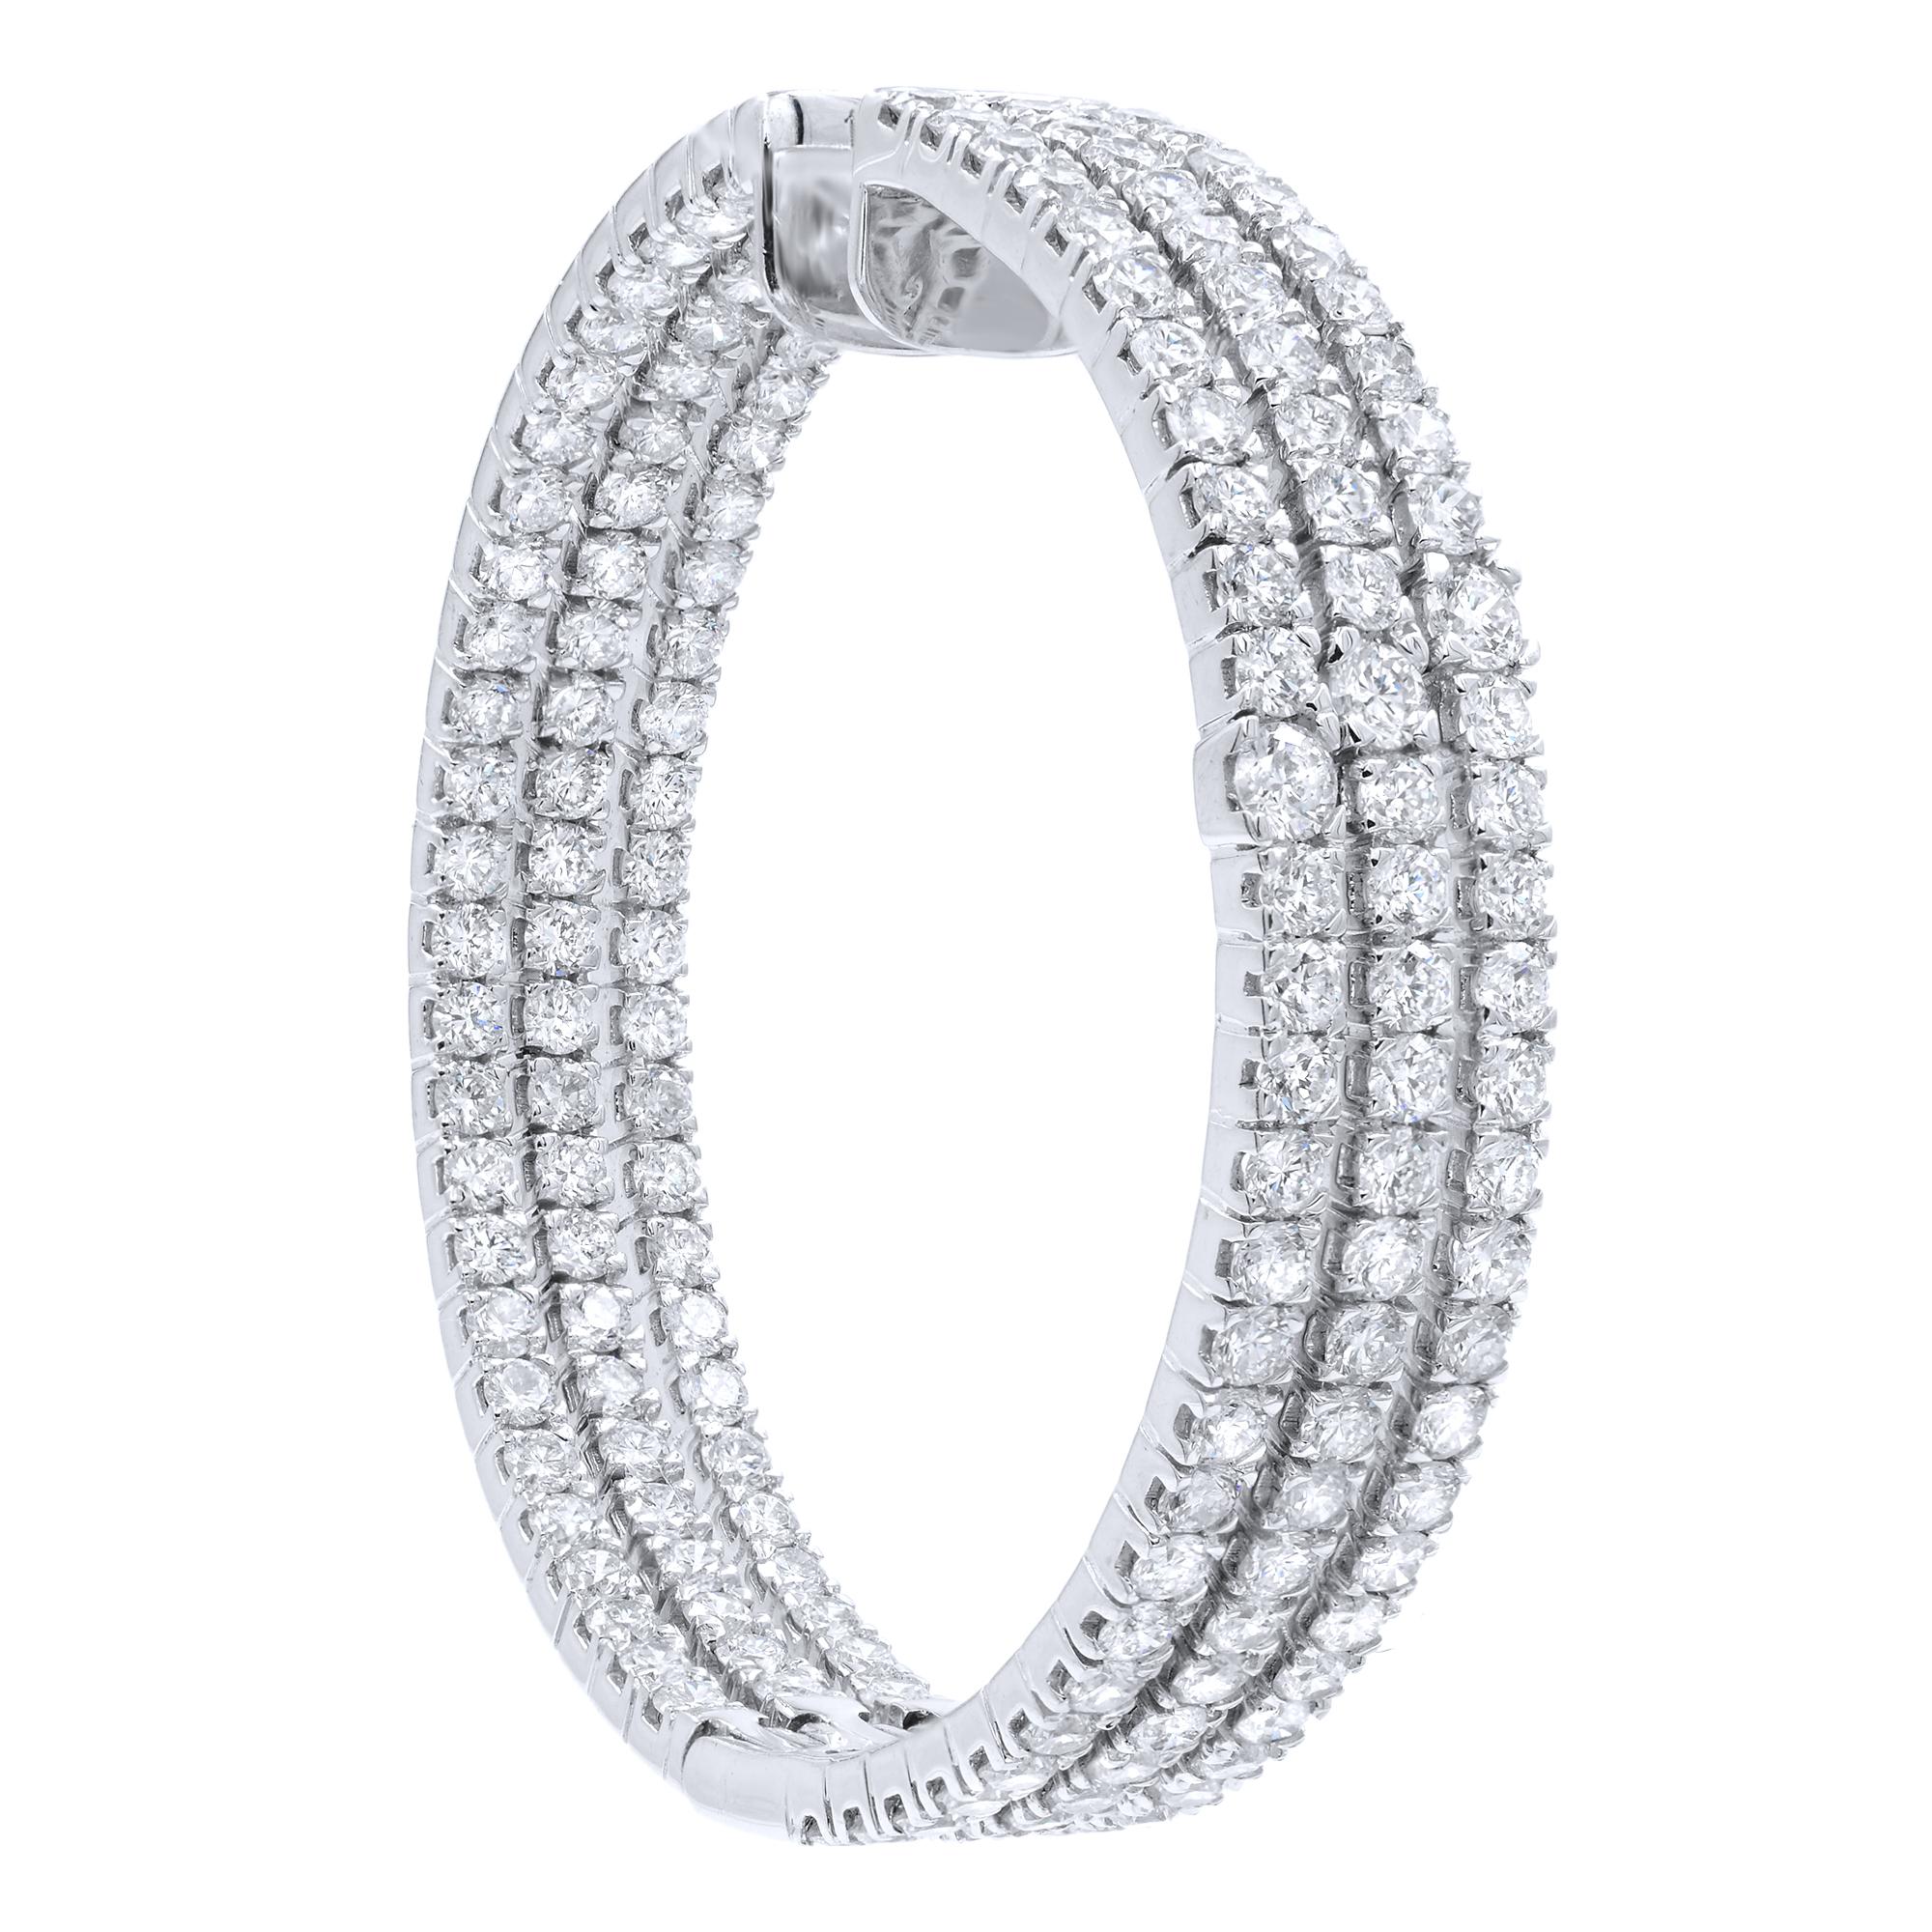 Triple Row Diamond Hoop Earrings 8.33 Carat in 18 Karat White Gold In Excellent Condition In New York, NY